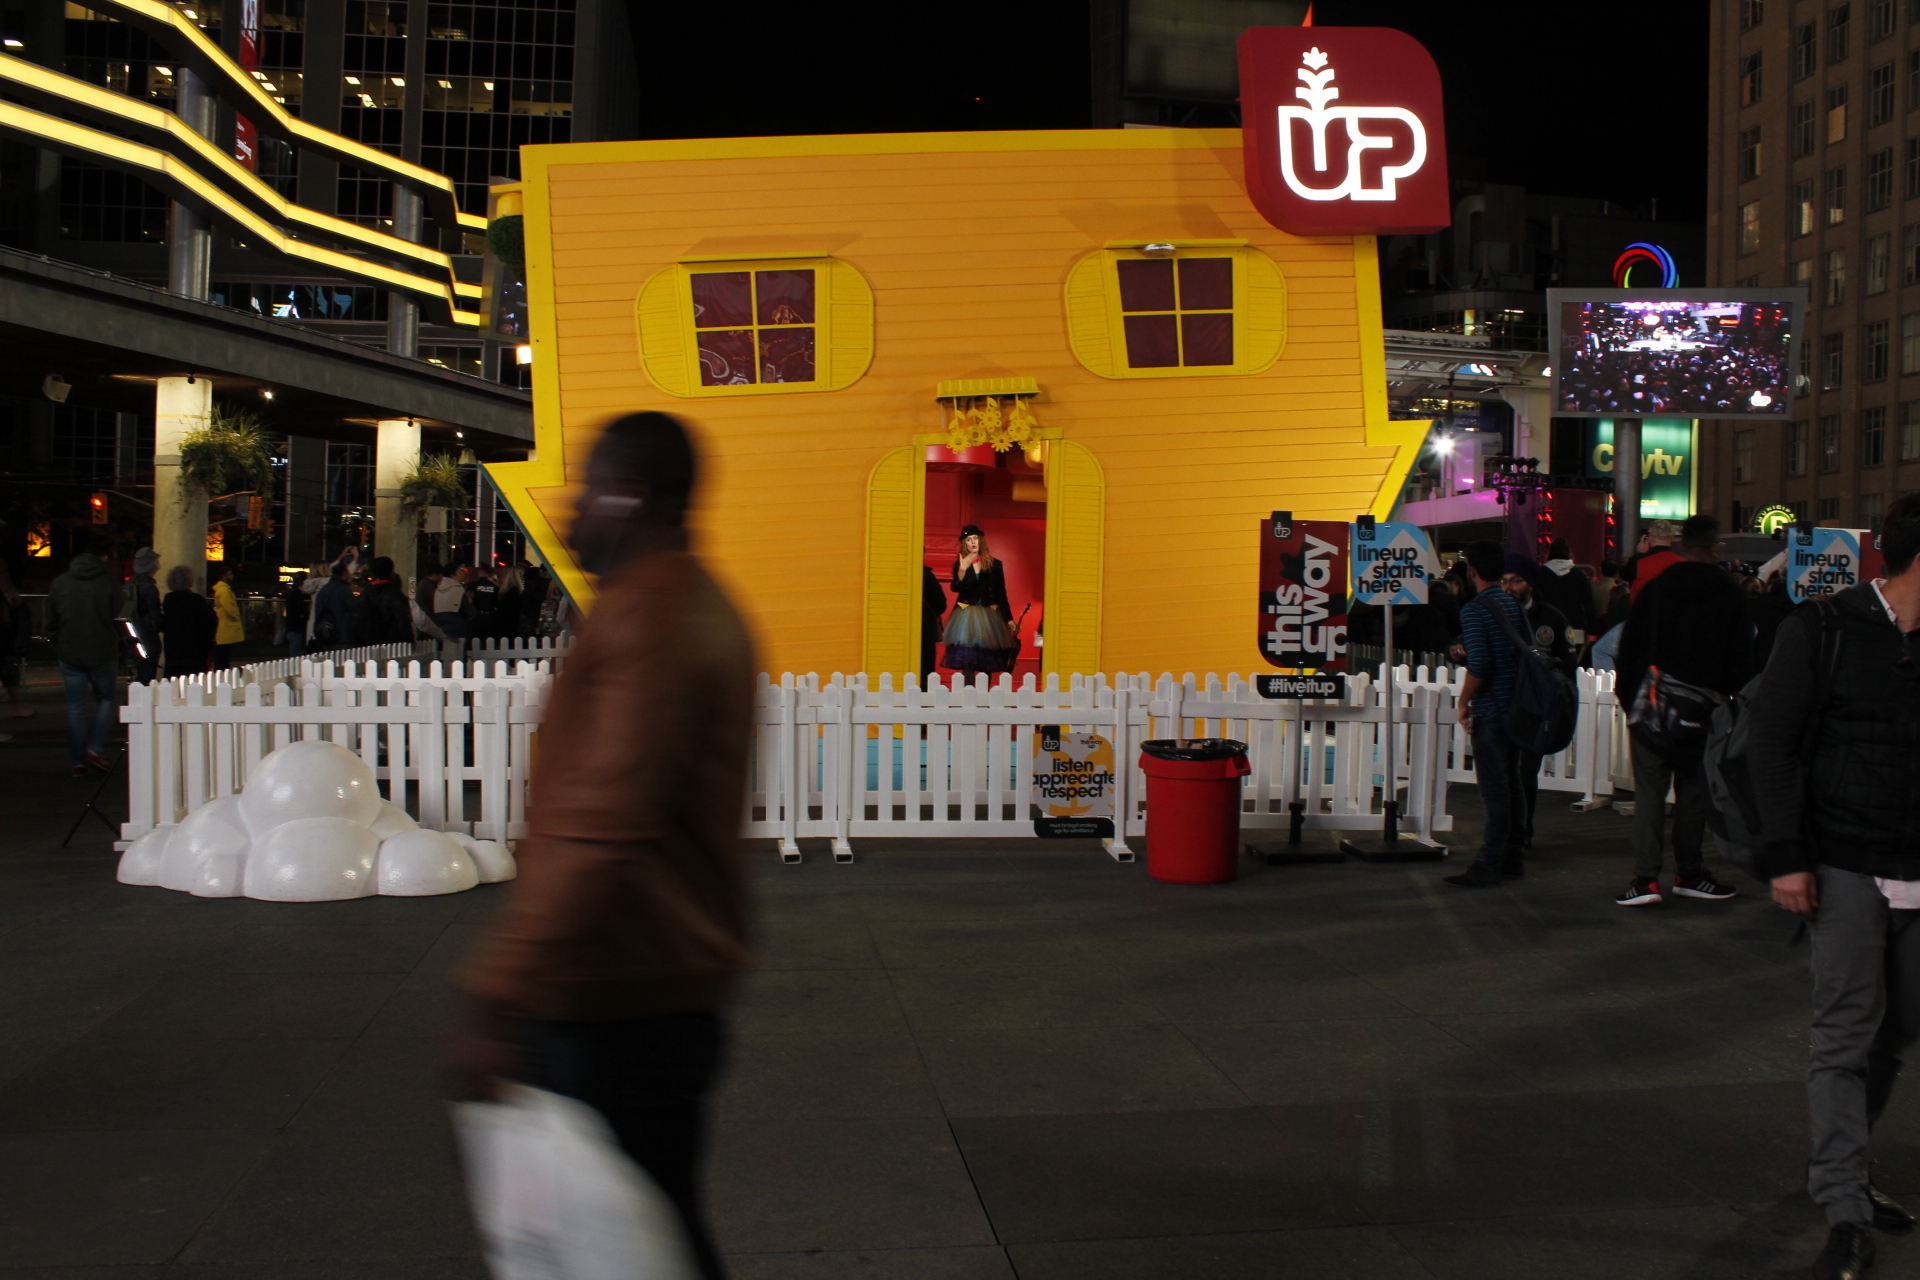 In Dundas Square a house has started a revolution. Decided to stand up by going upside down.